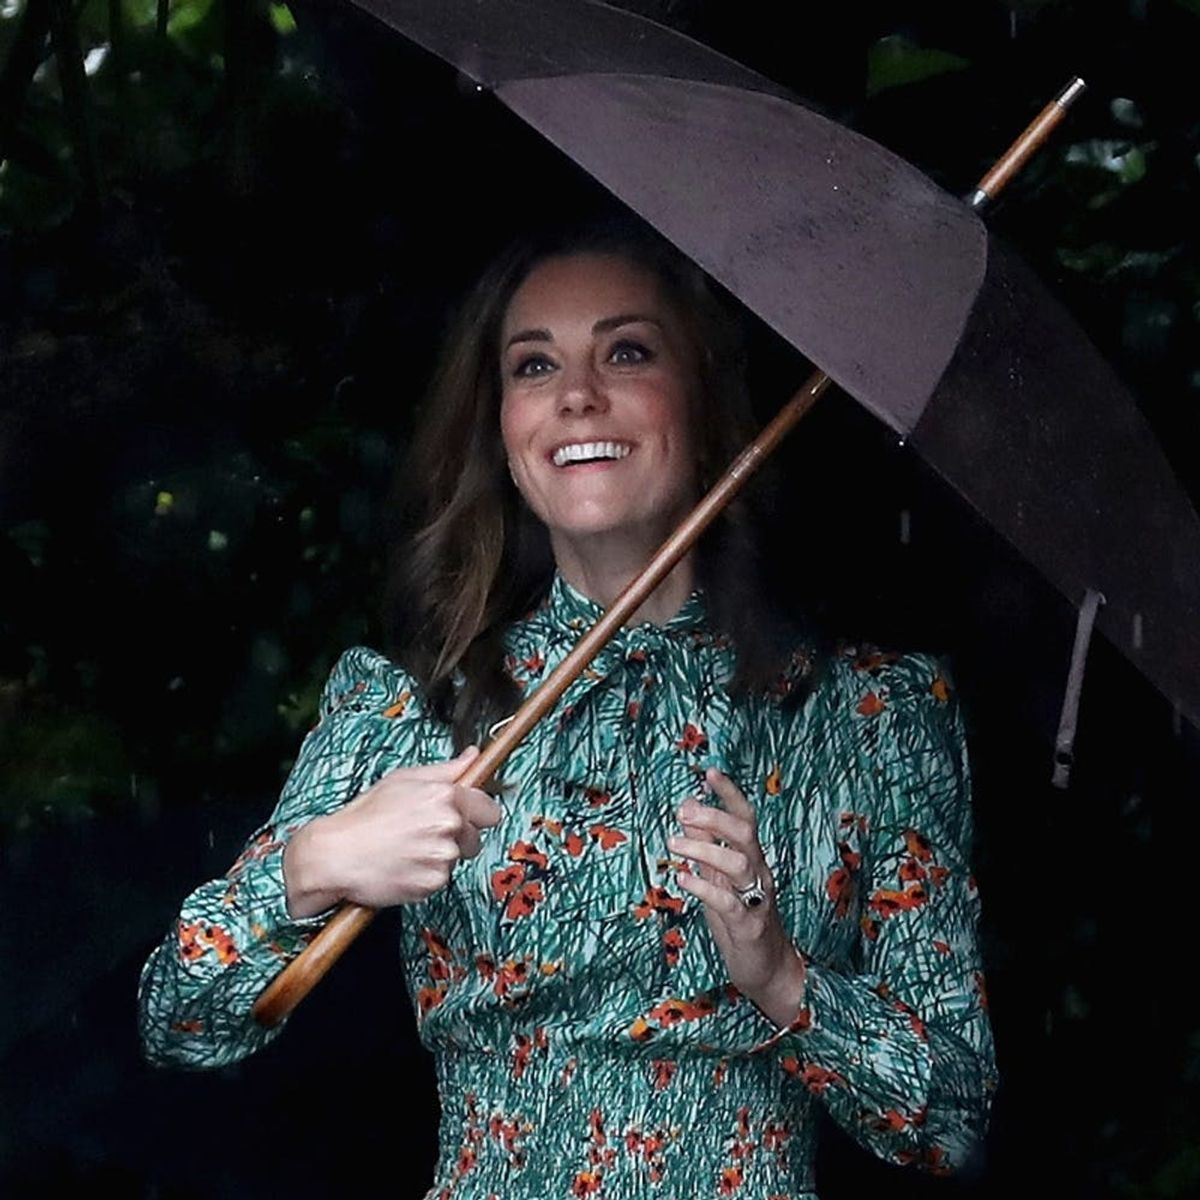 What You Need to Know About Kate Middleton’s Pregnancy Condition, Hyperemesis Gravidarum